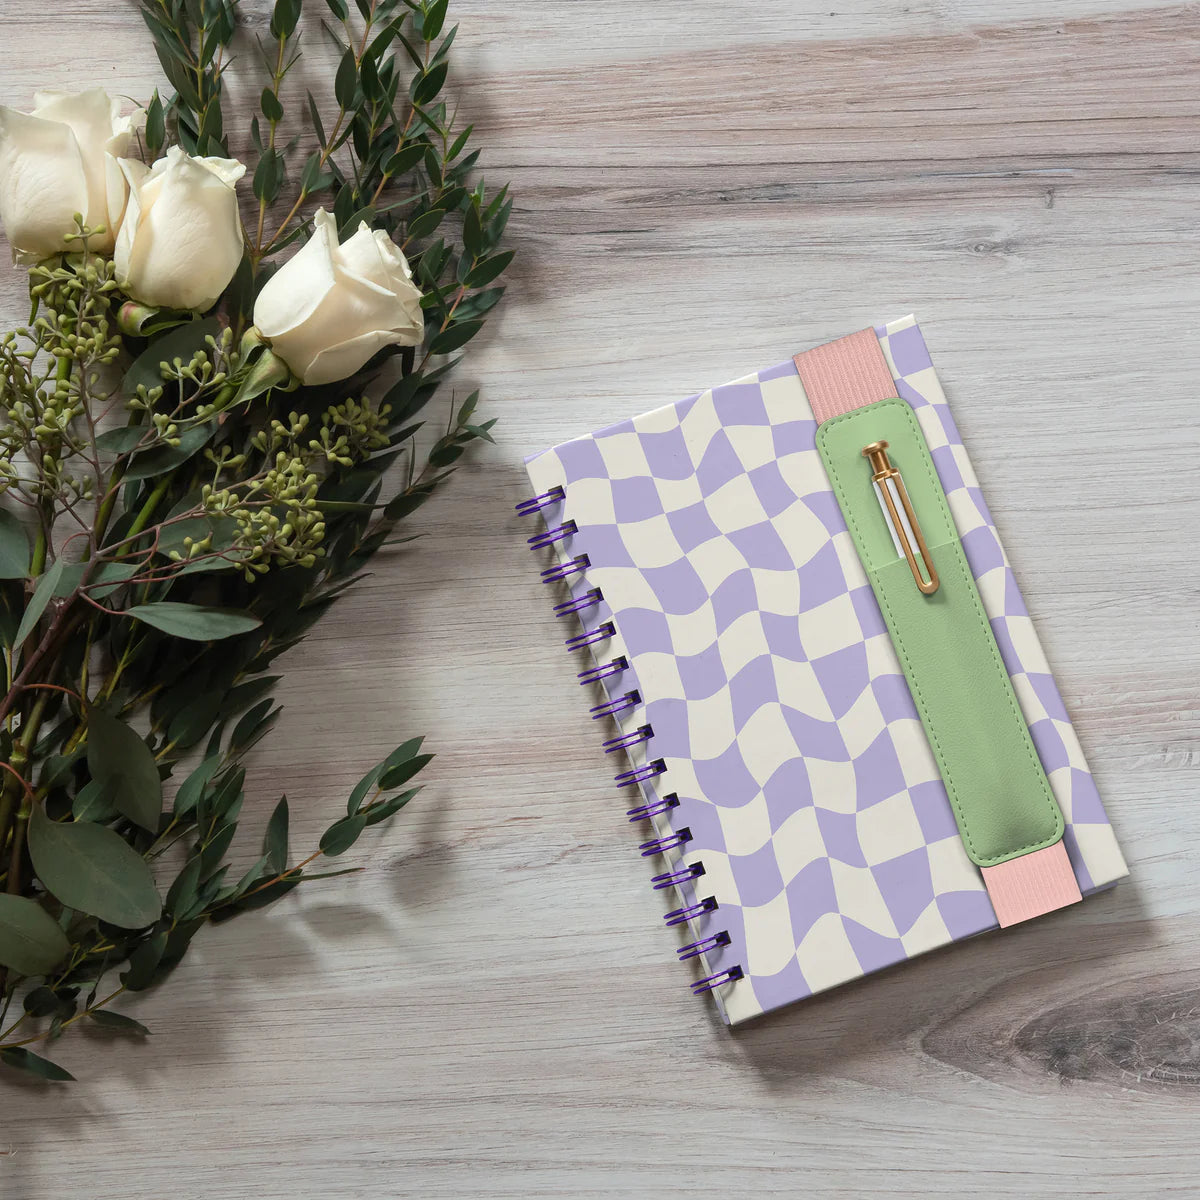 Oliver Notebook with Pen Pocket: A Mirage of Thoughts